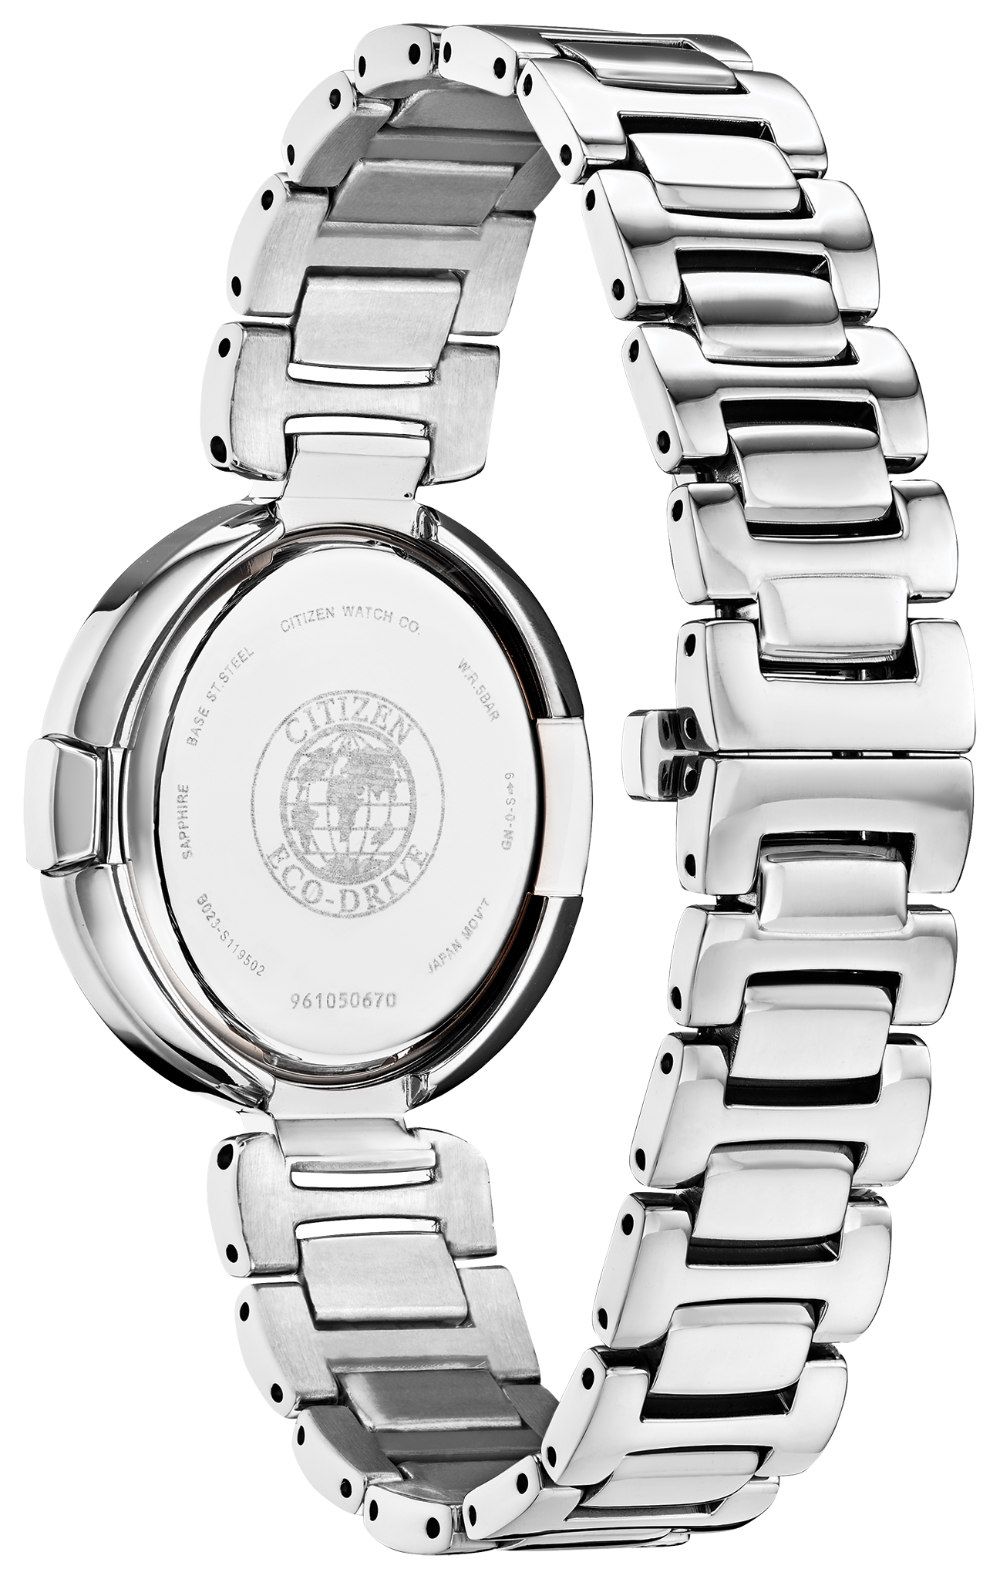 Citizen Eco-Drive - 34mm Capella - Stainless Steel